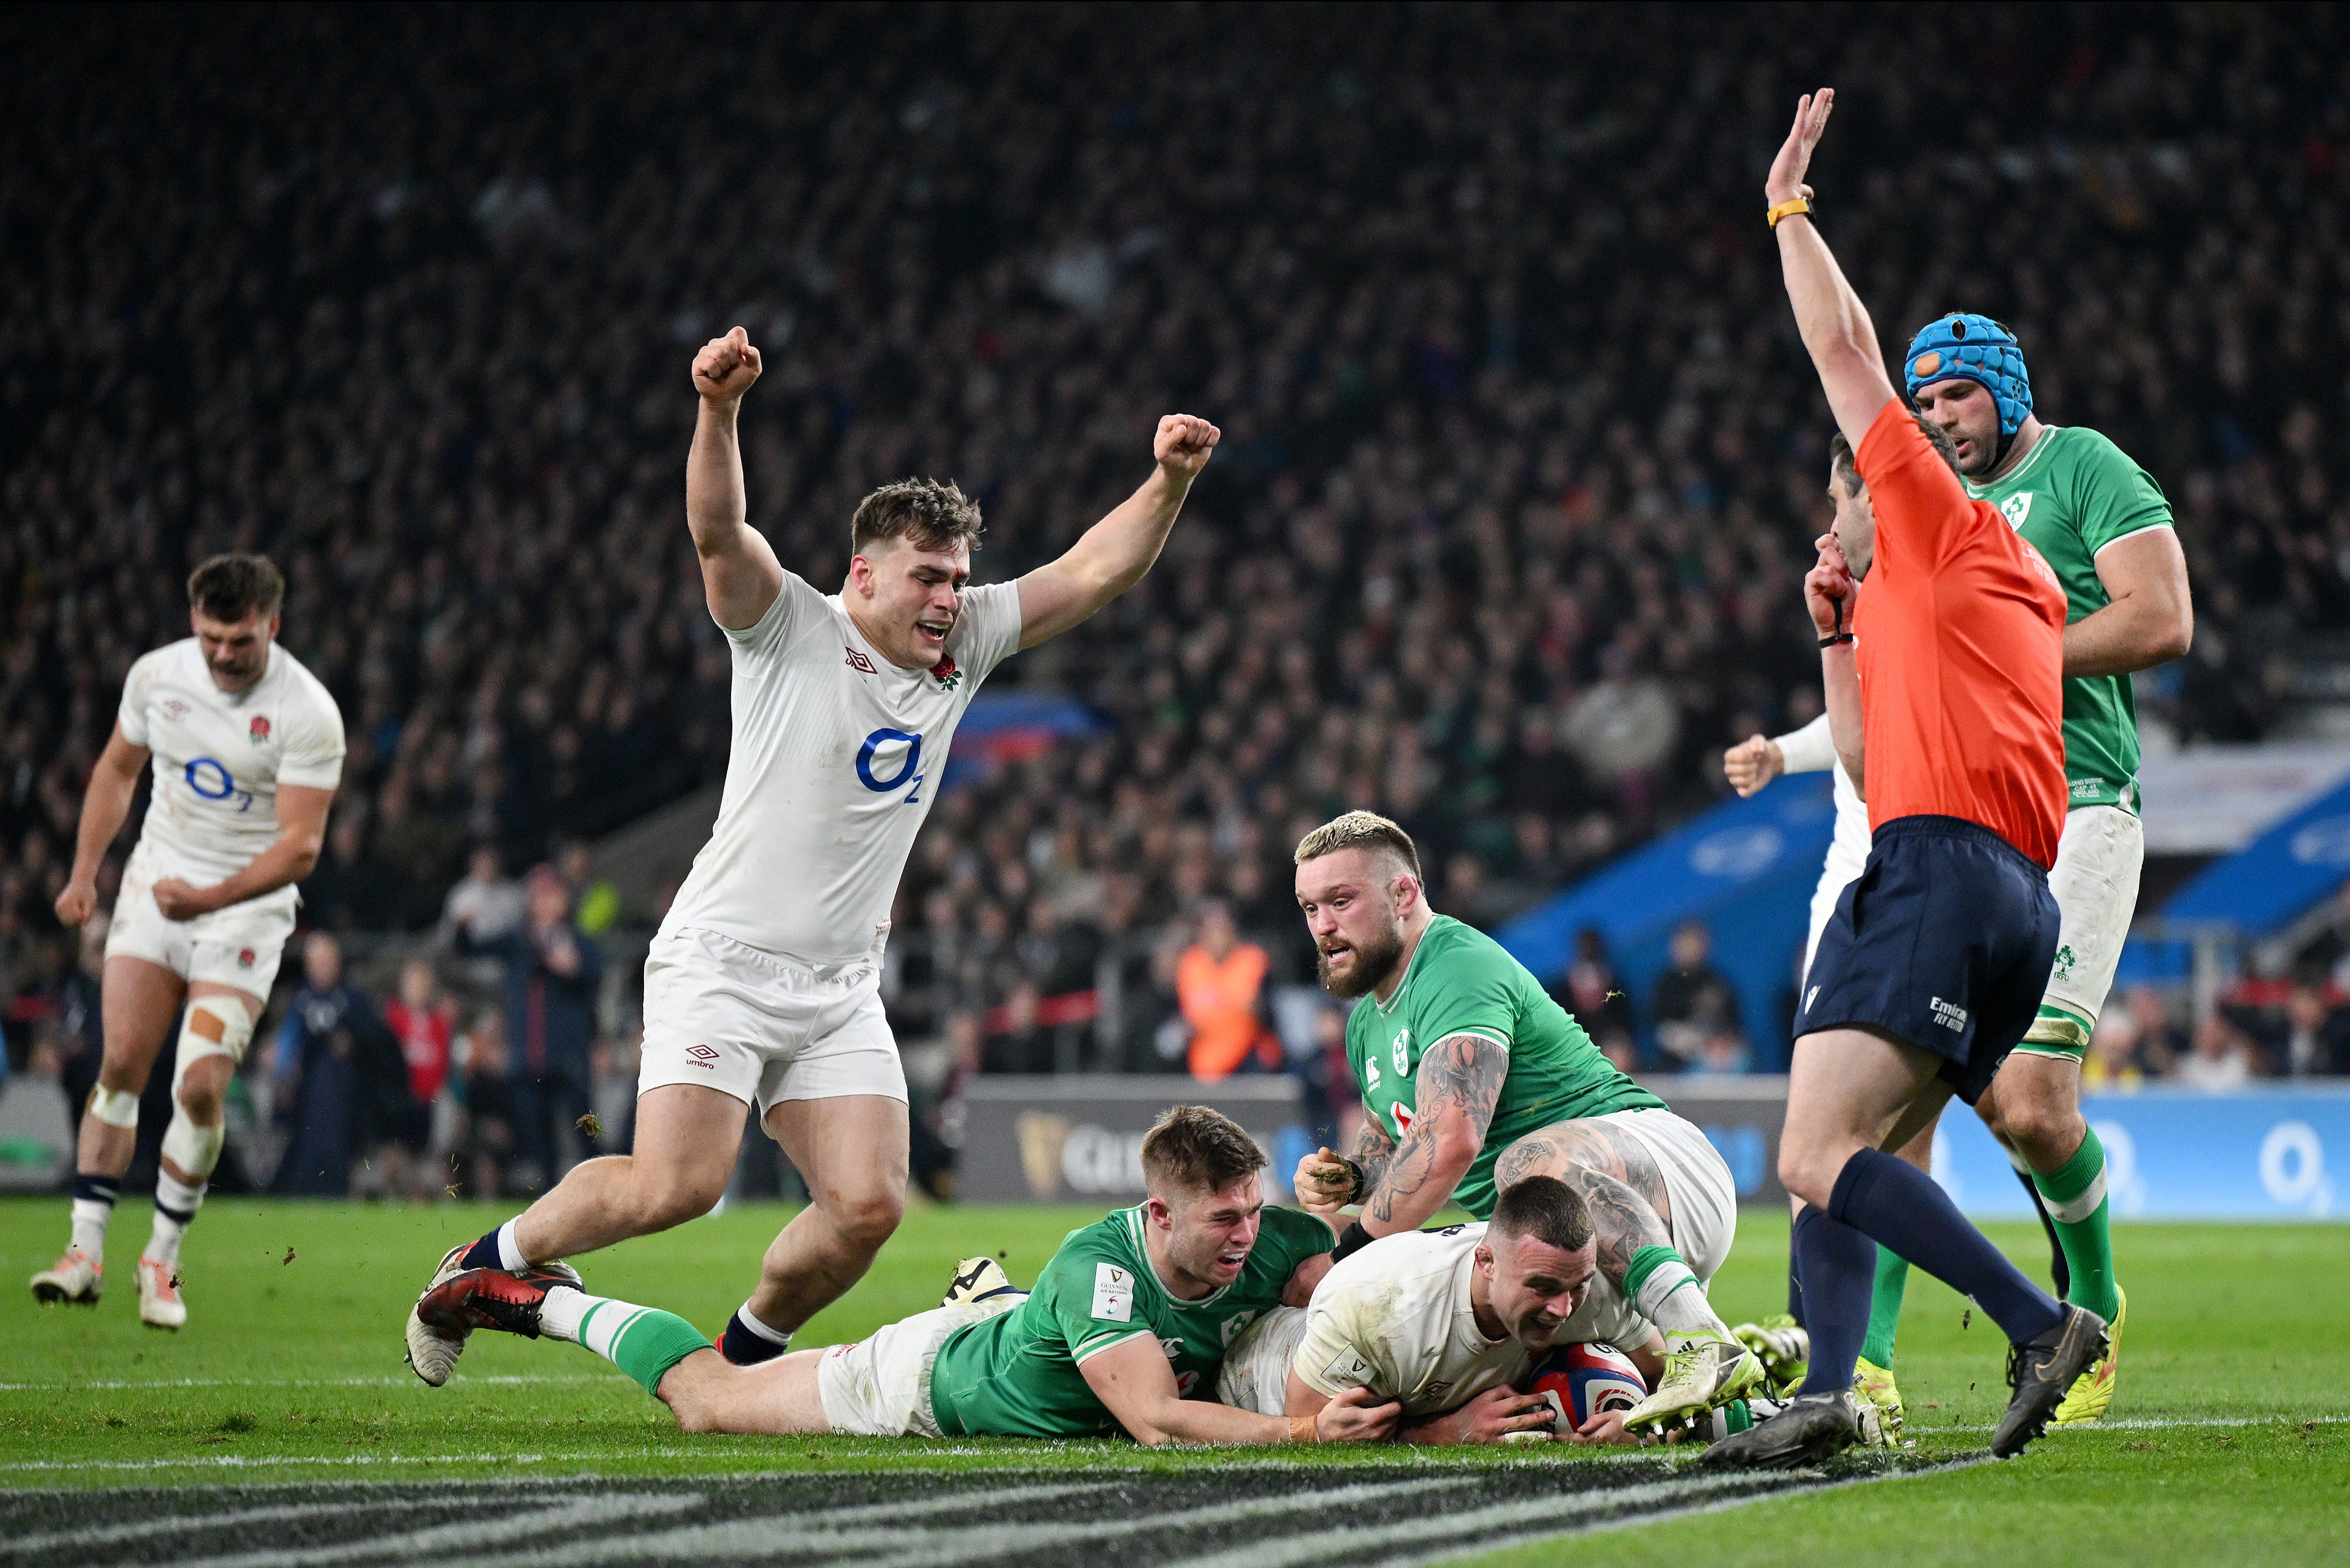 Ben Earl scored a try in a magnificent individual performance that helped England to victory